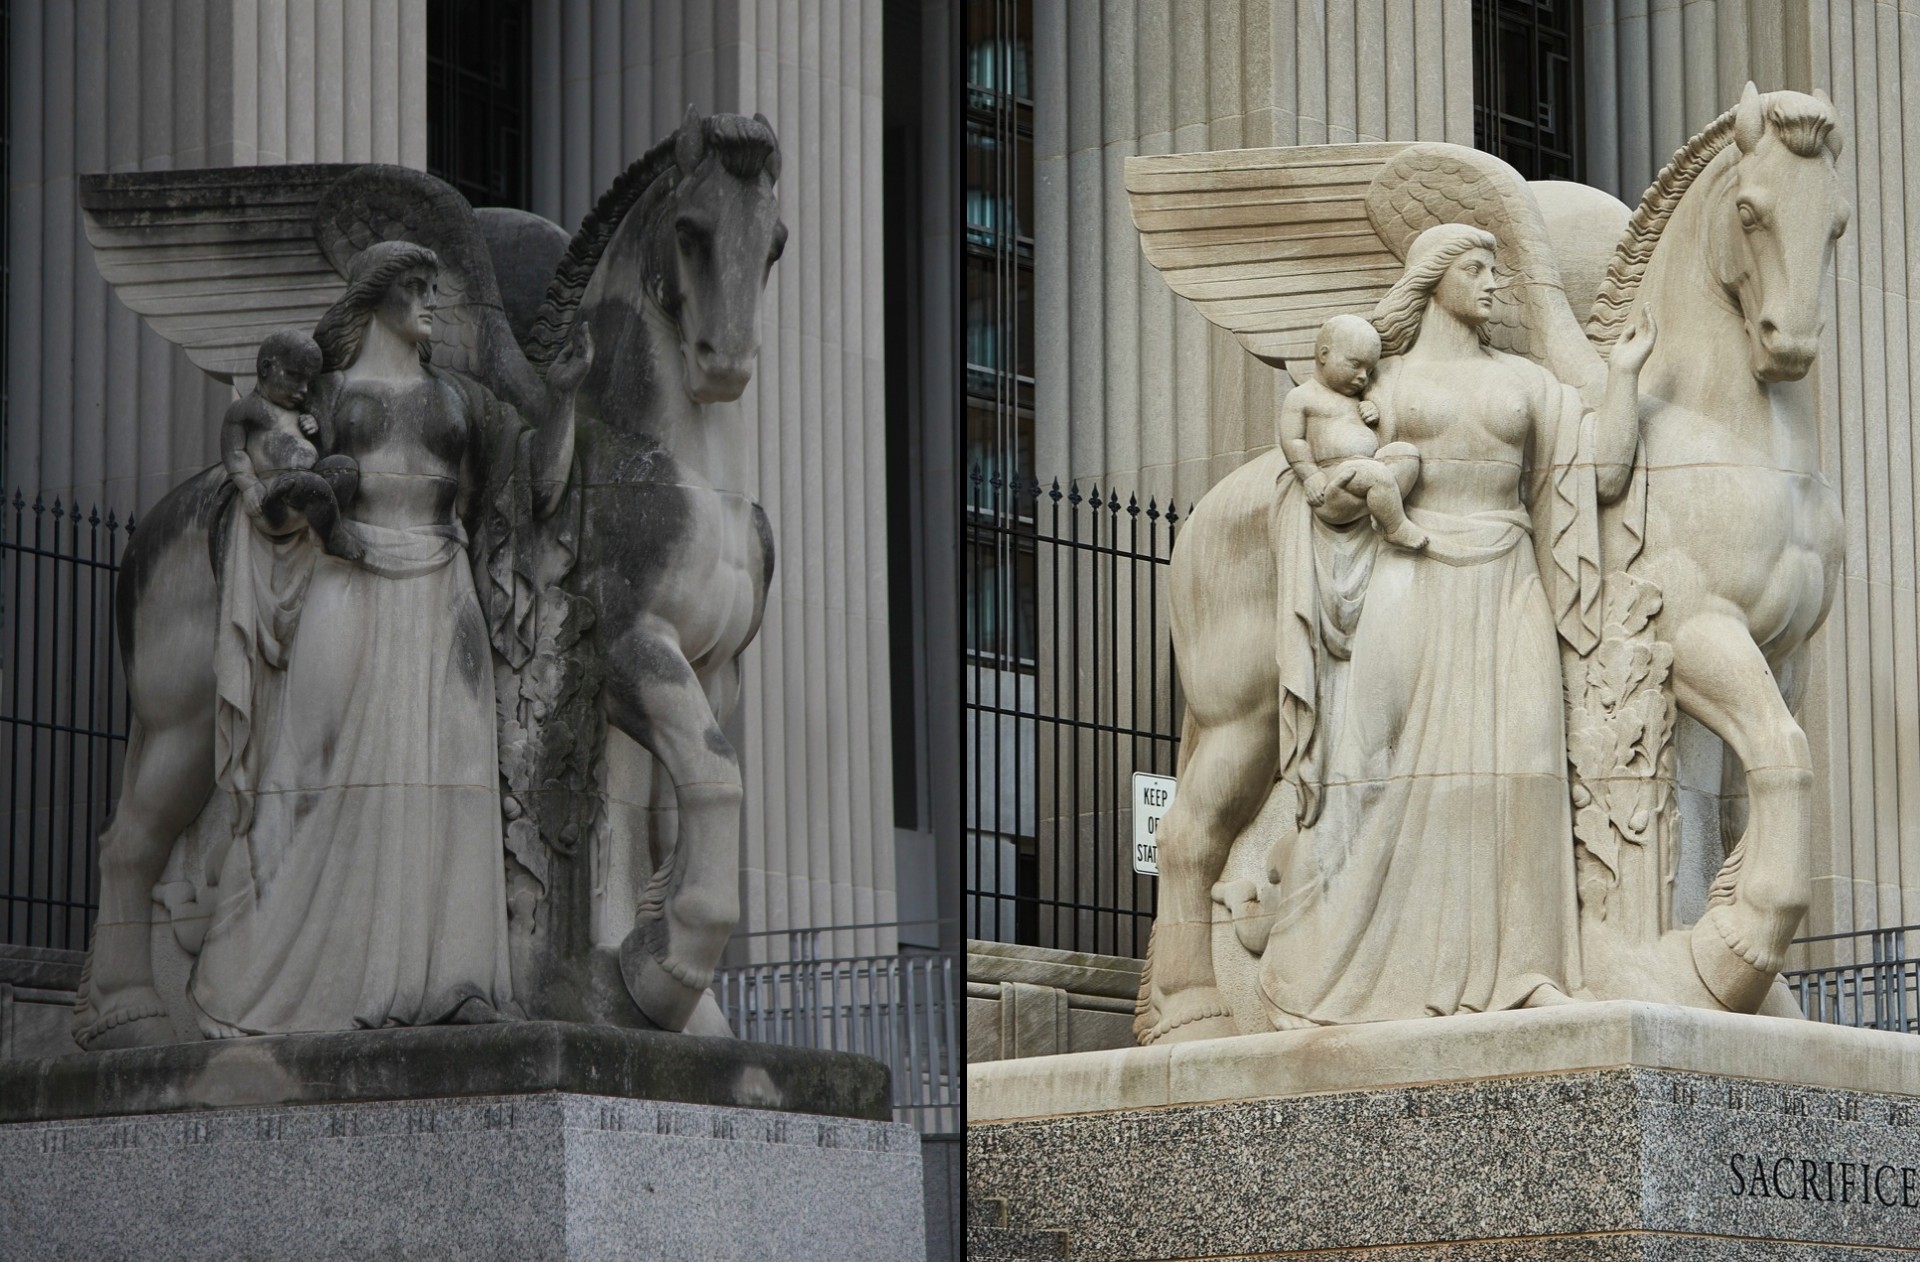 A side-by-side view of the same statuary sculpture before and after a public-private partnership allowed for a cleaning. On the left, the statue is darkened with spots of grime, while on the right it is cleaned and dazzling.